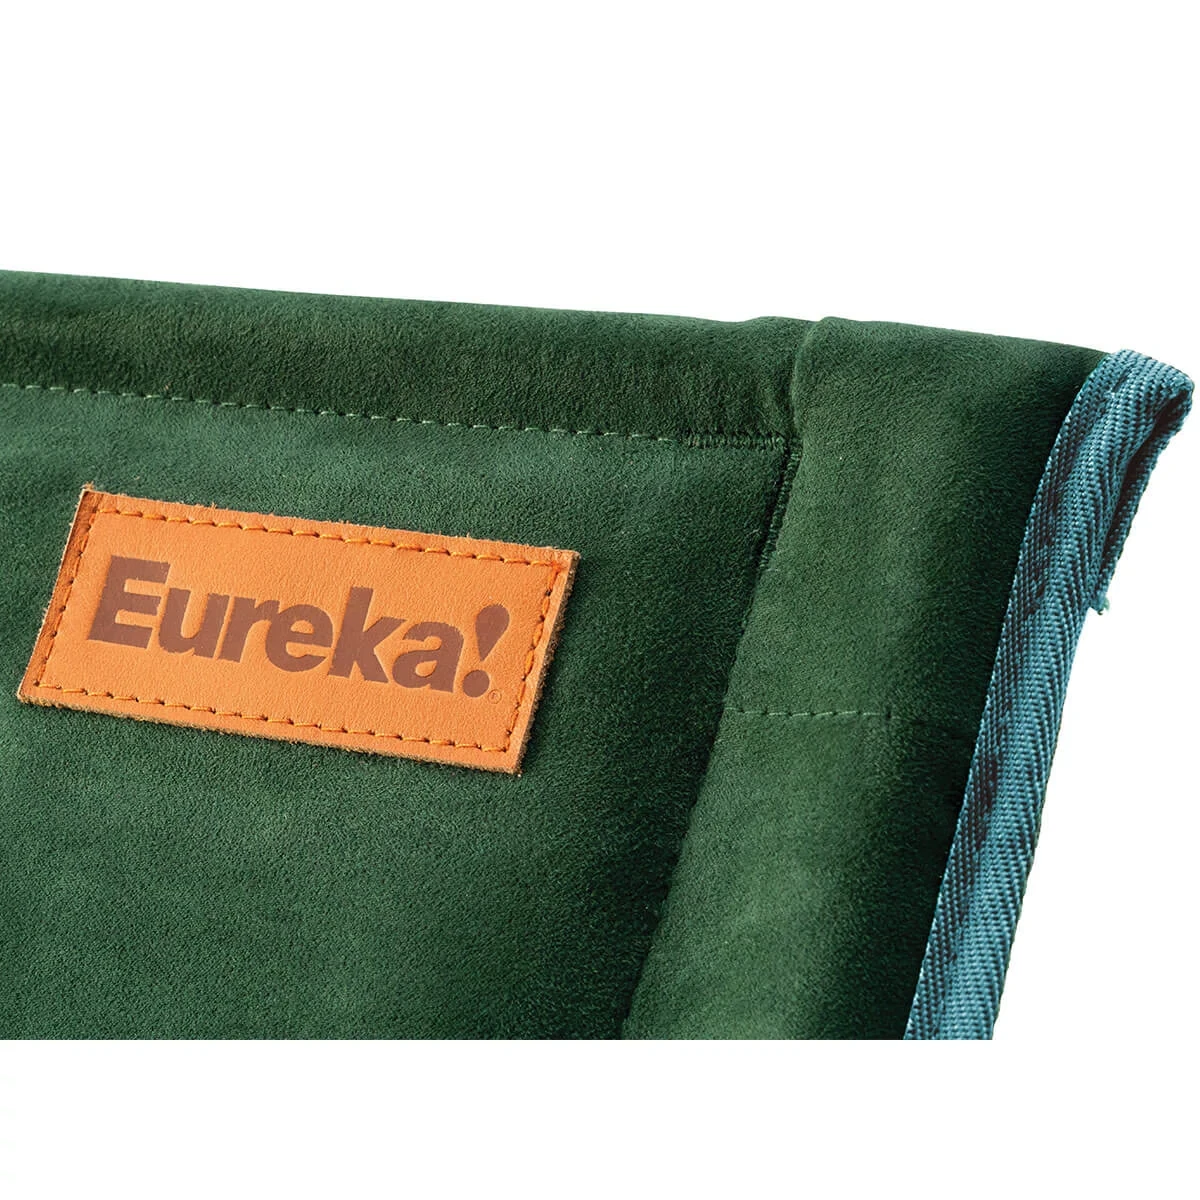 Close up of Eureka! emblem and stitching on Tagalong Comfort Camp Chair